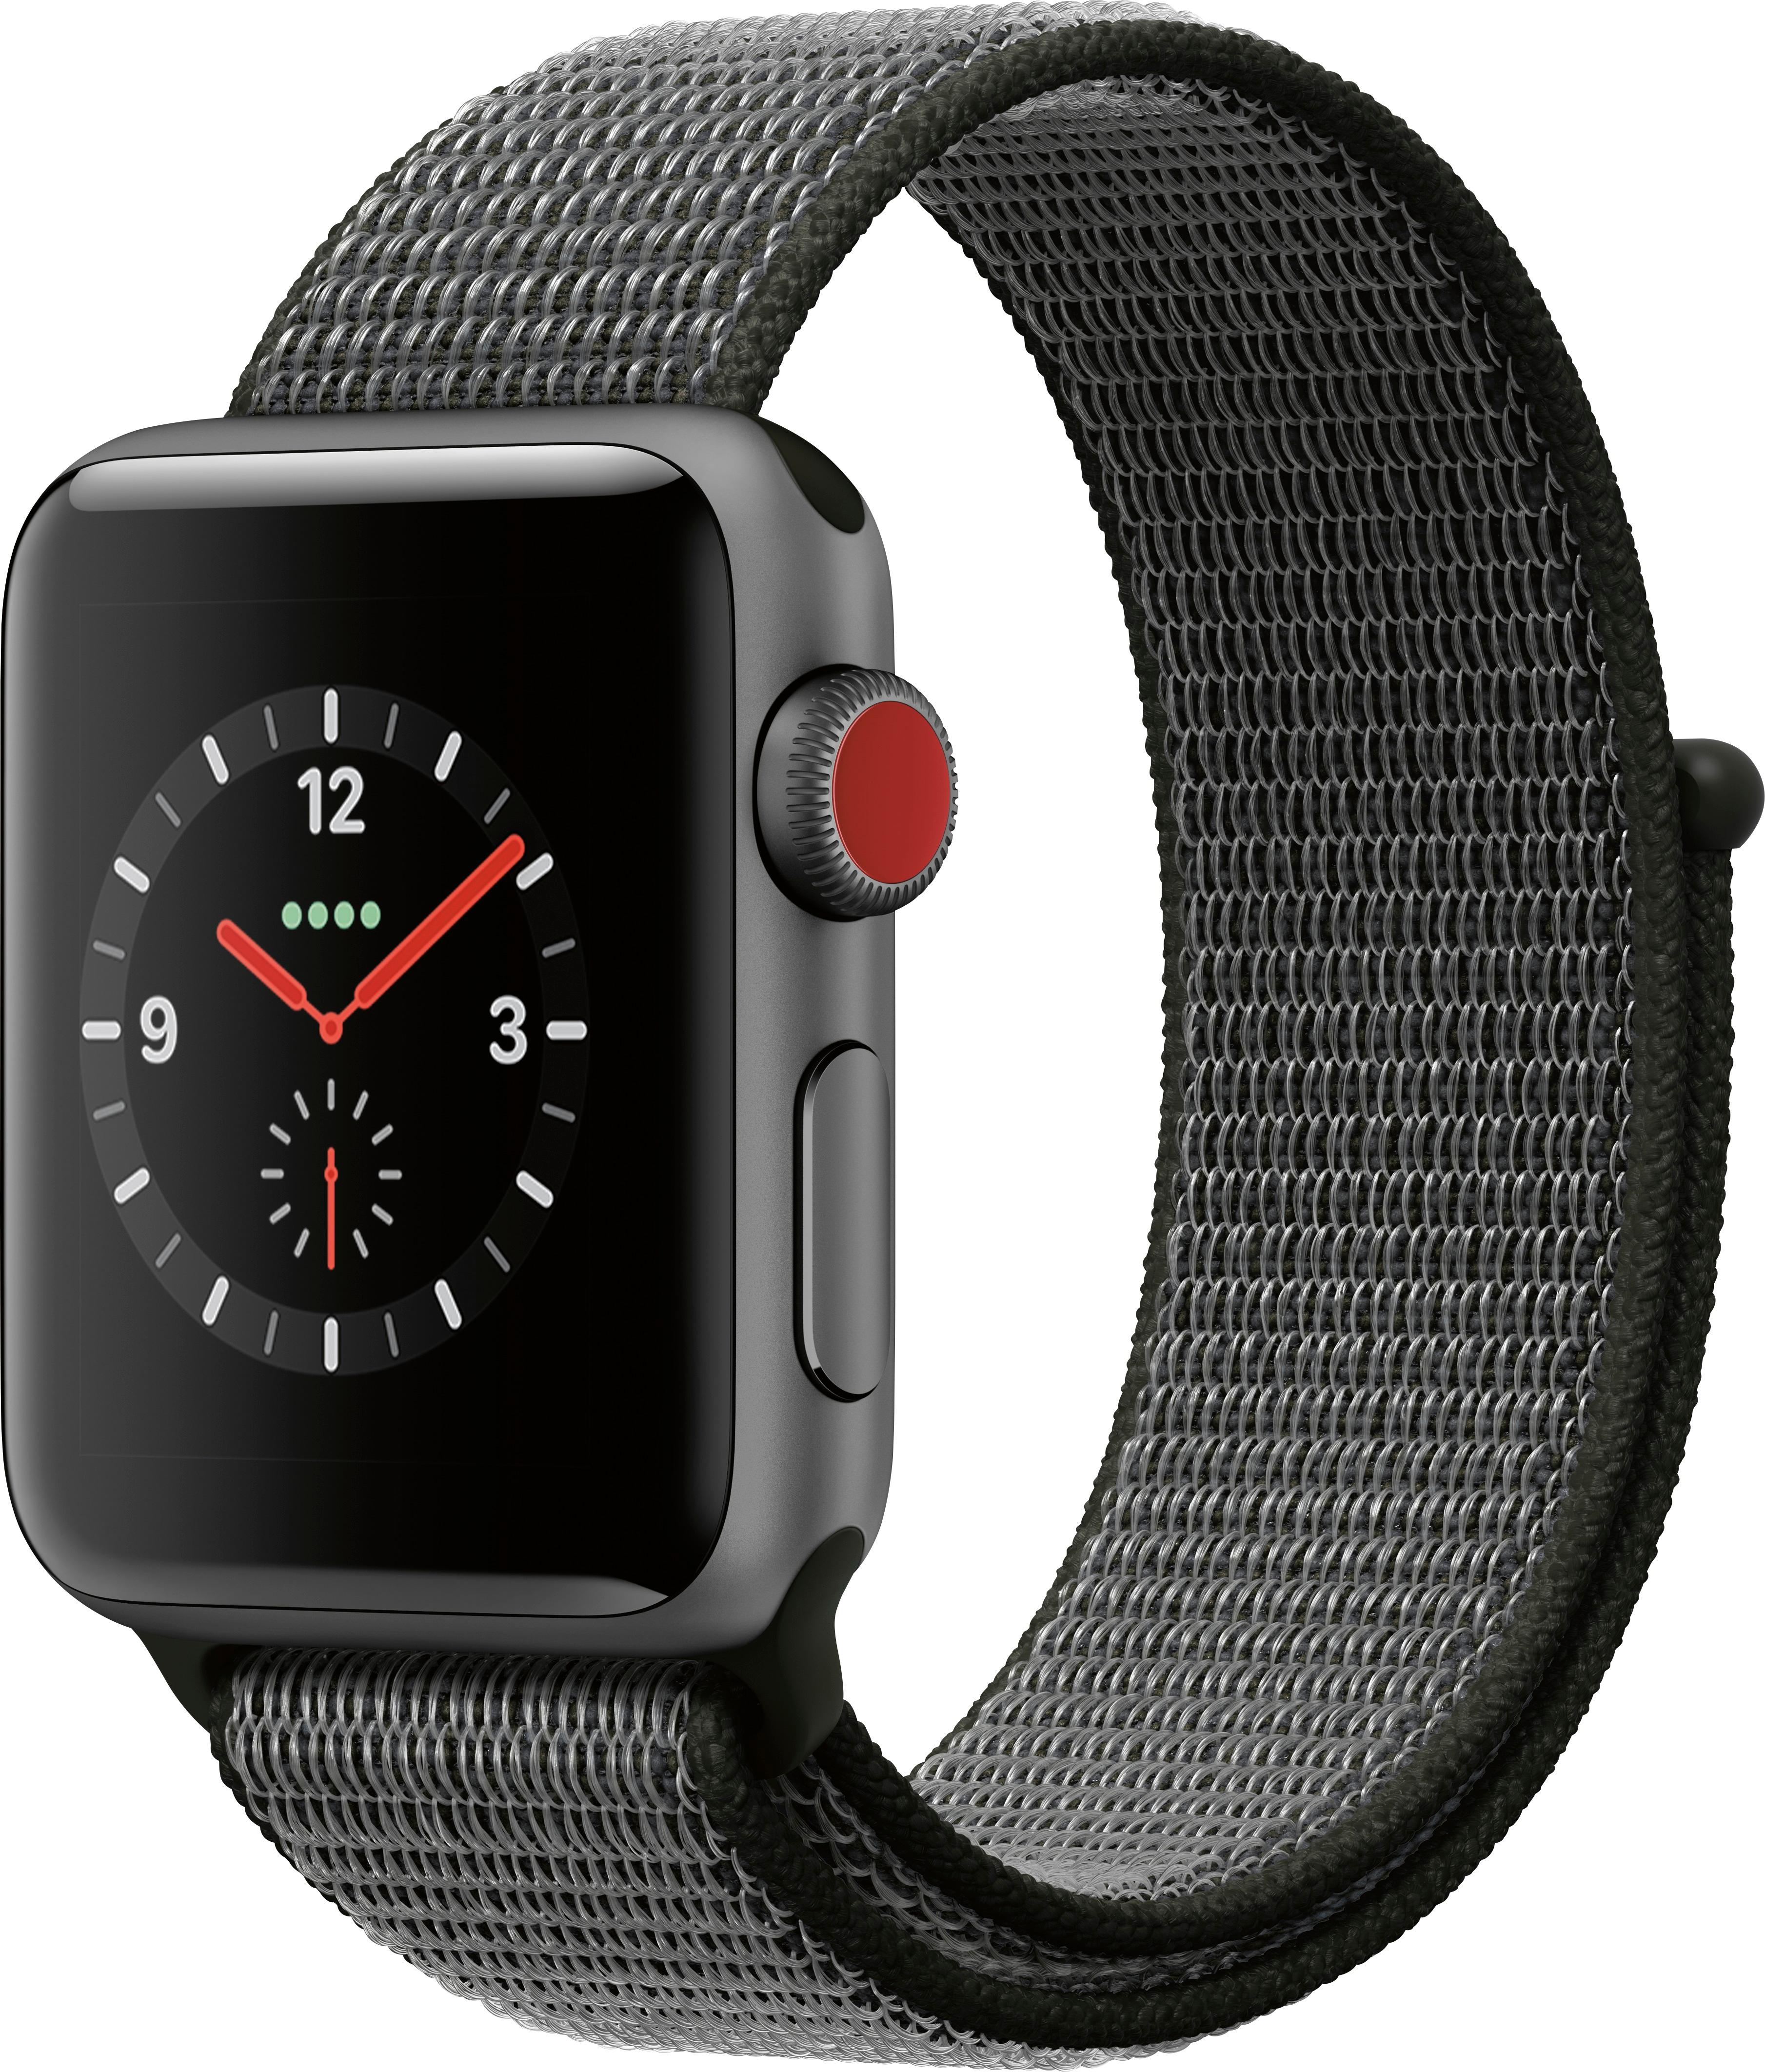 Angle View: Apple Watch Gen 3 Series 3 Cell 38mm MQJT2LL/A Space Gray Aluminum Dark Olive Sport Loop